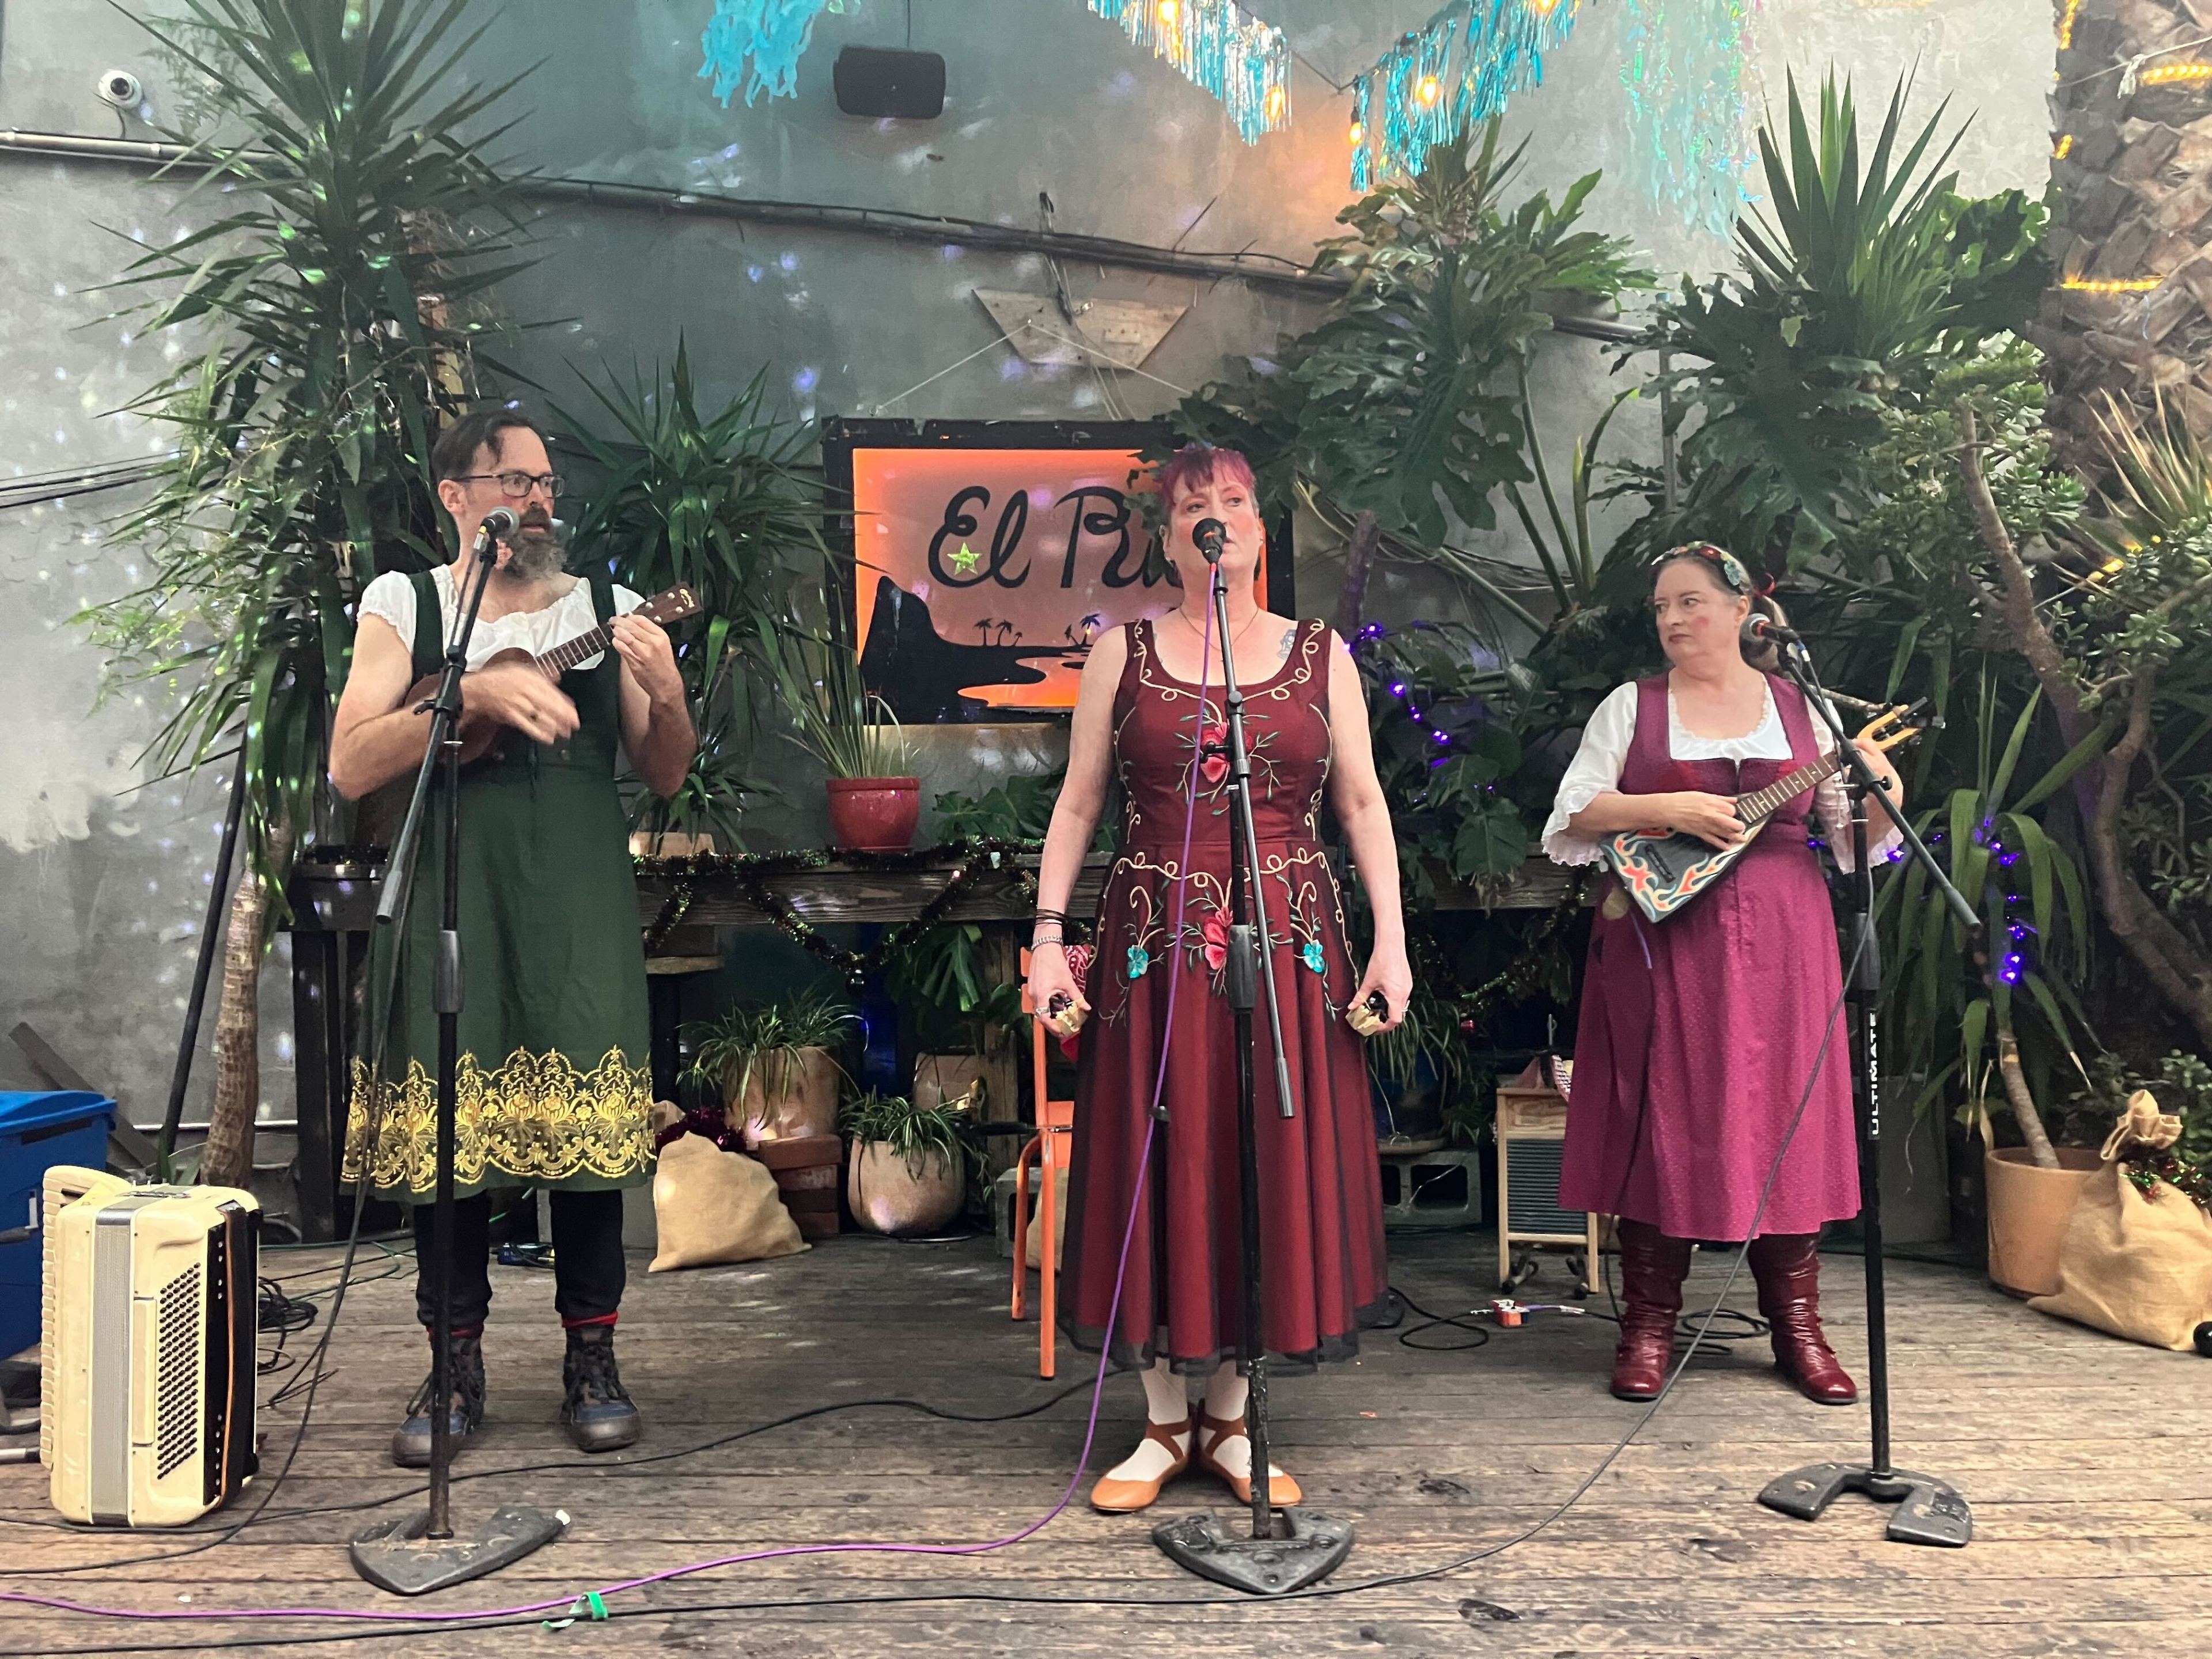 The string trio, 3 Drink Circus, performs to open the 5th annual Krampus Costume Pageant at the El Rio Bar in the Mission District on Saturday, Dec. 2, 2023.